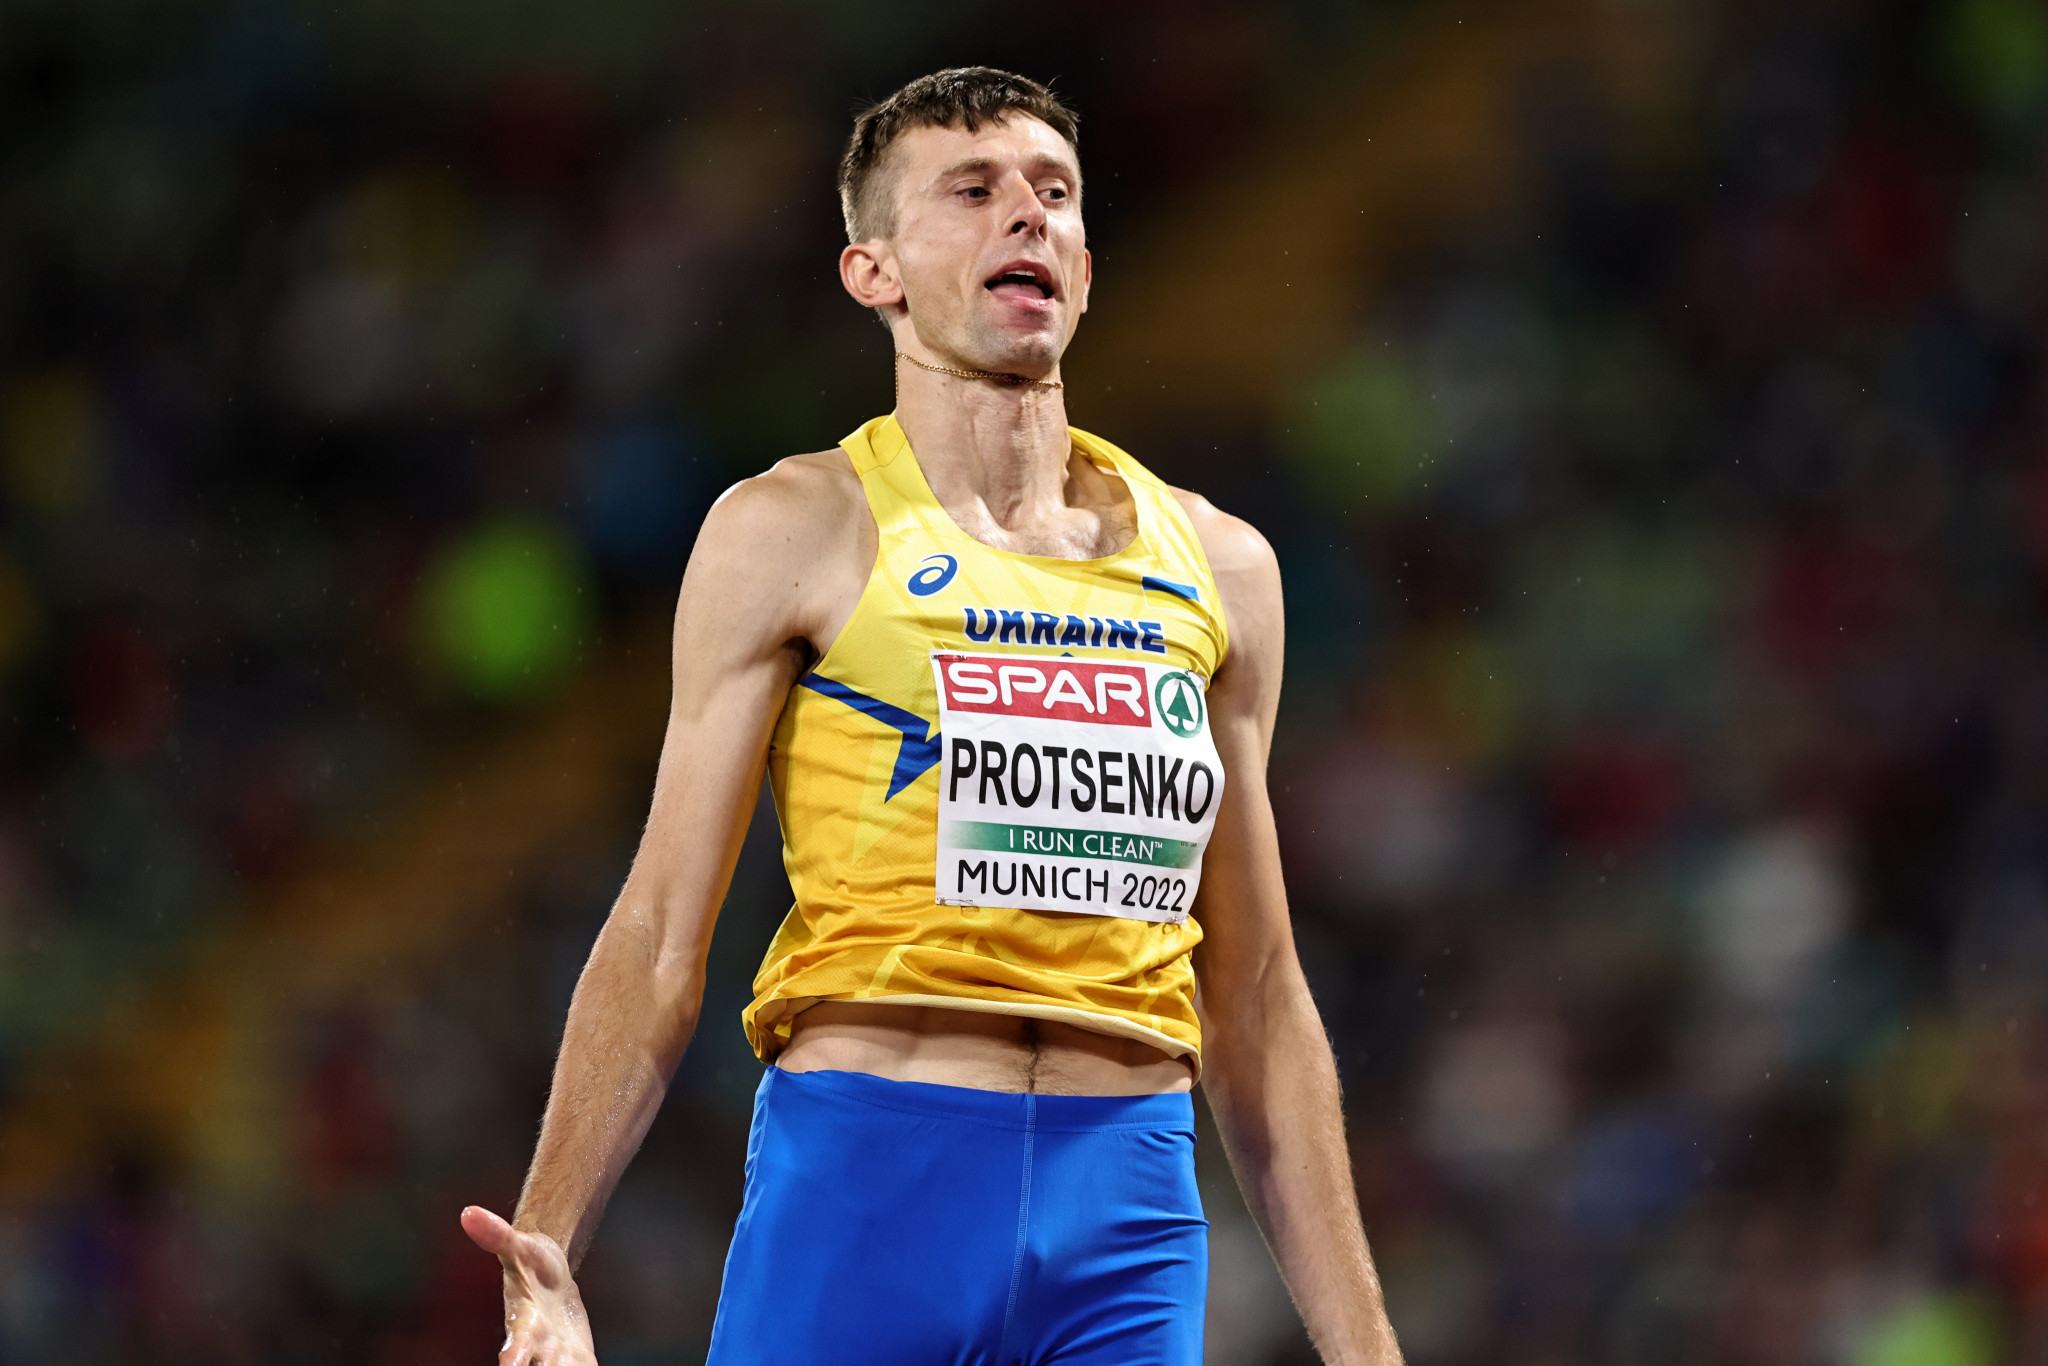 Gennadii Zuiev has won the World Athletics Coaching Achievement Award for helping Andriy Protsenko to European and world medals ©Getty Images